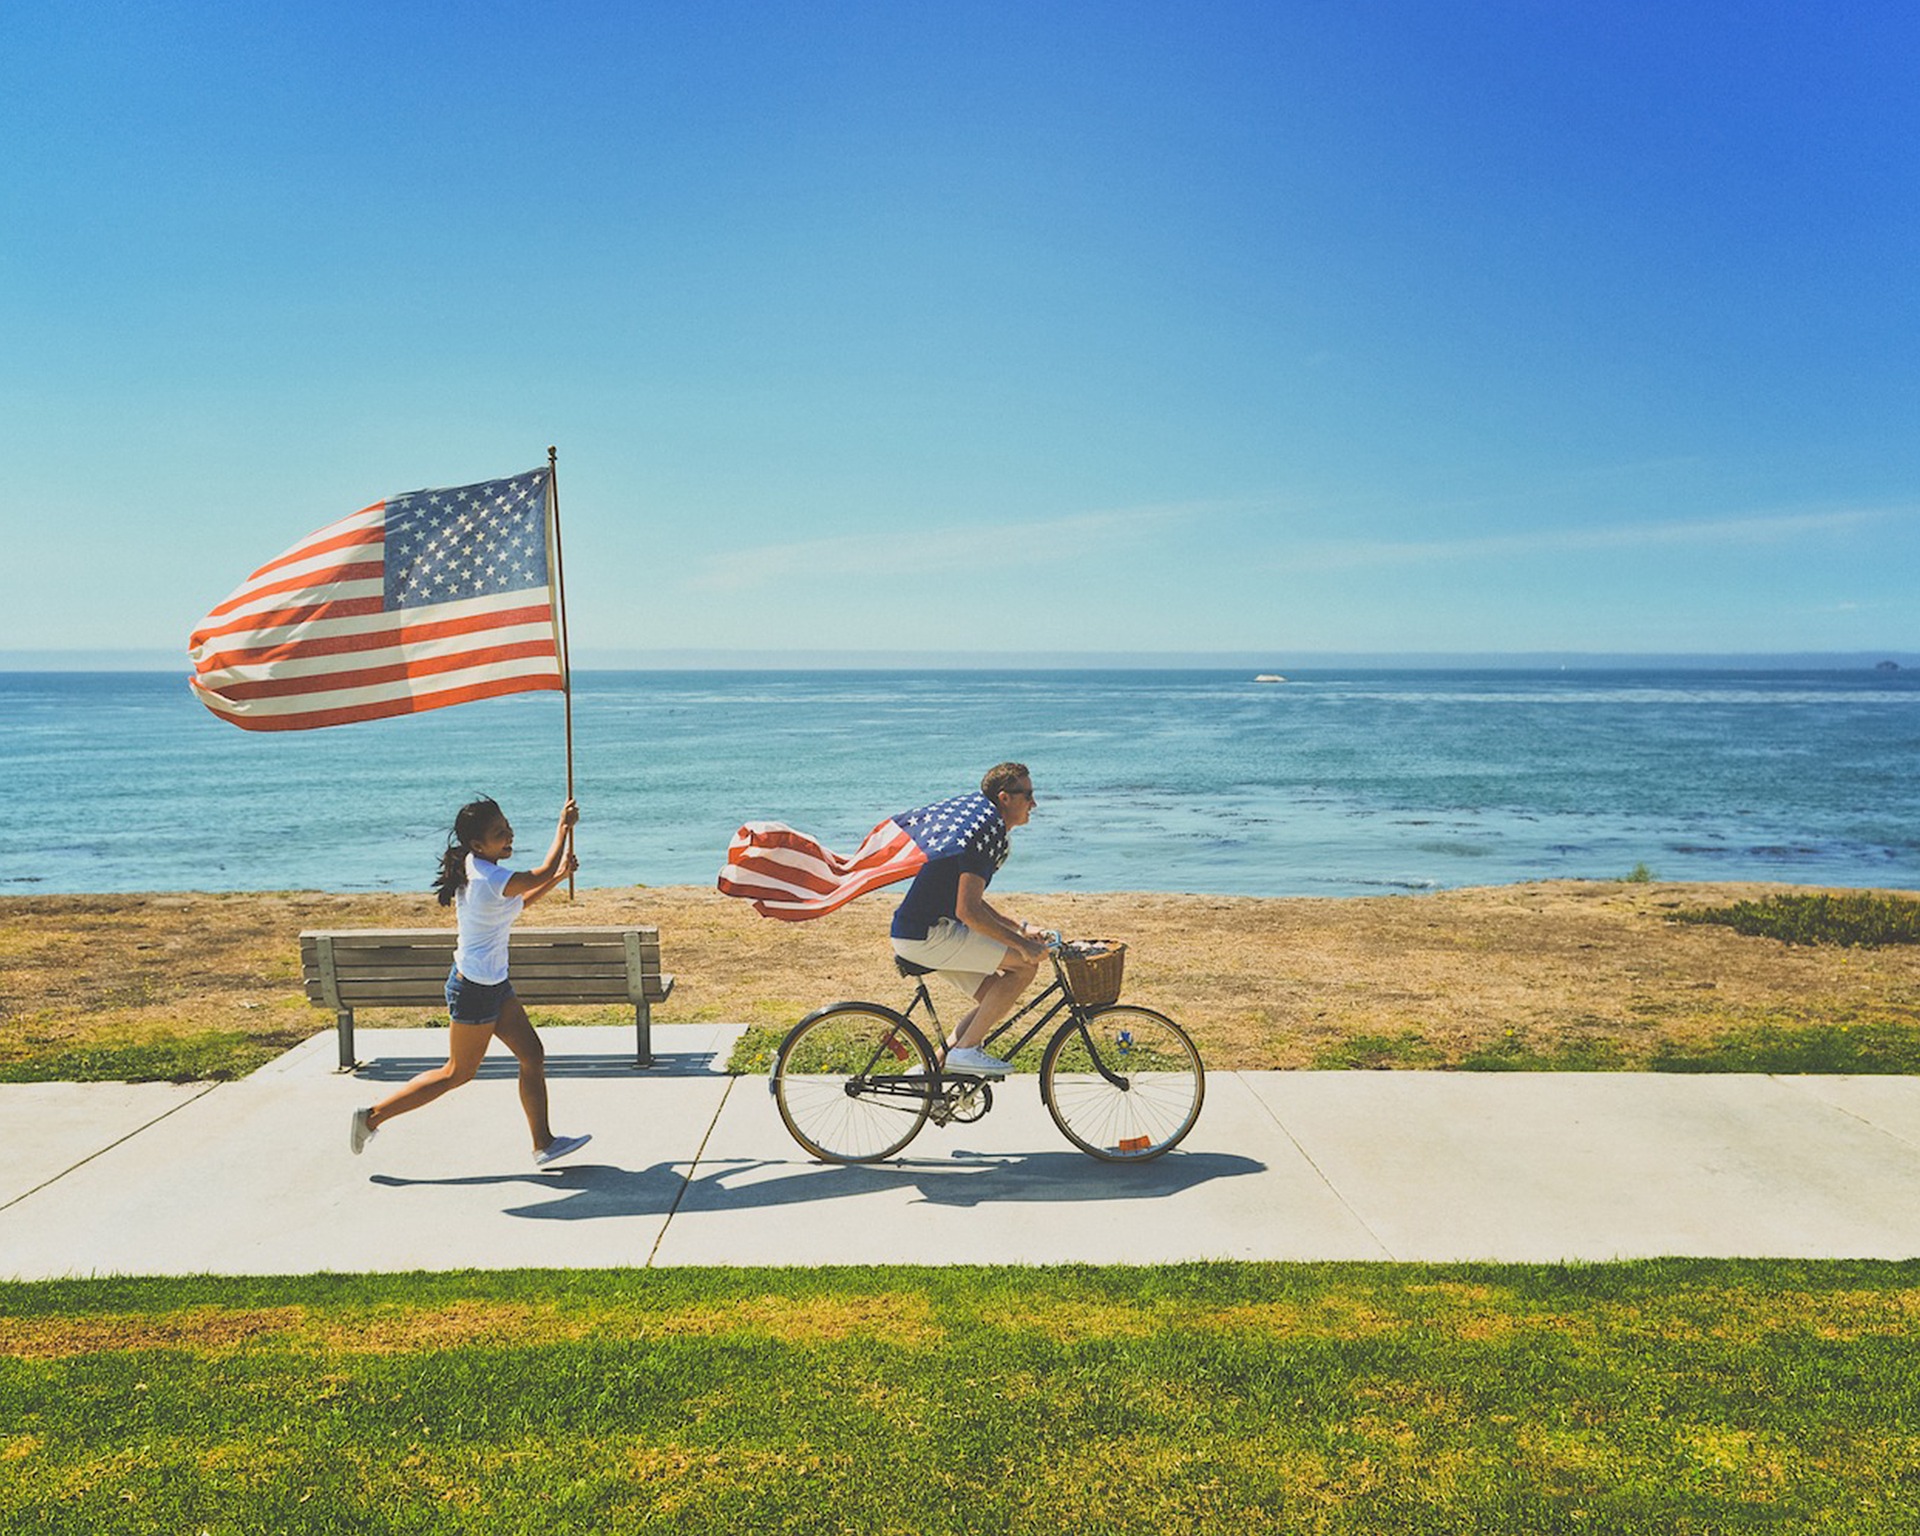 Holidays can be lonely. Make sure to include those who may not have a place to go this 4th of July